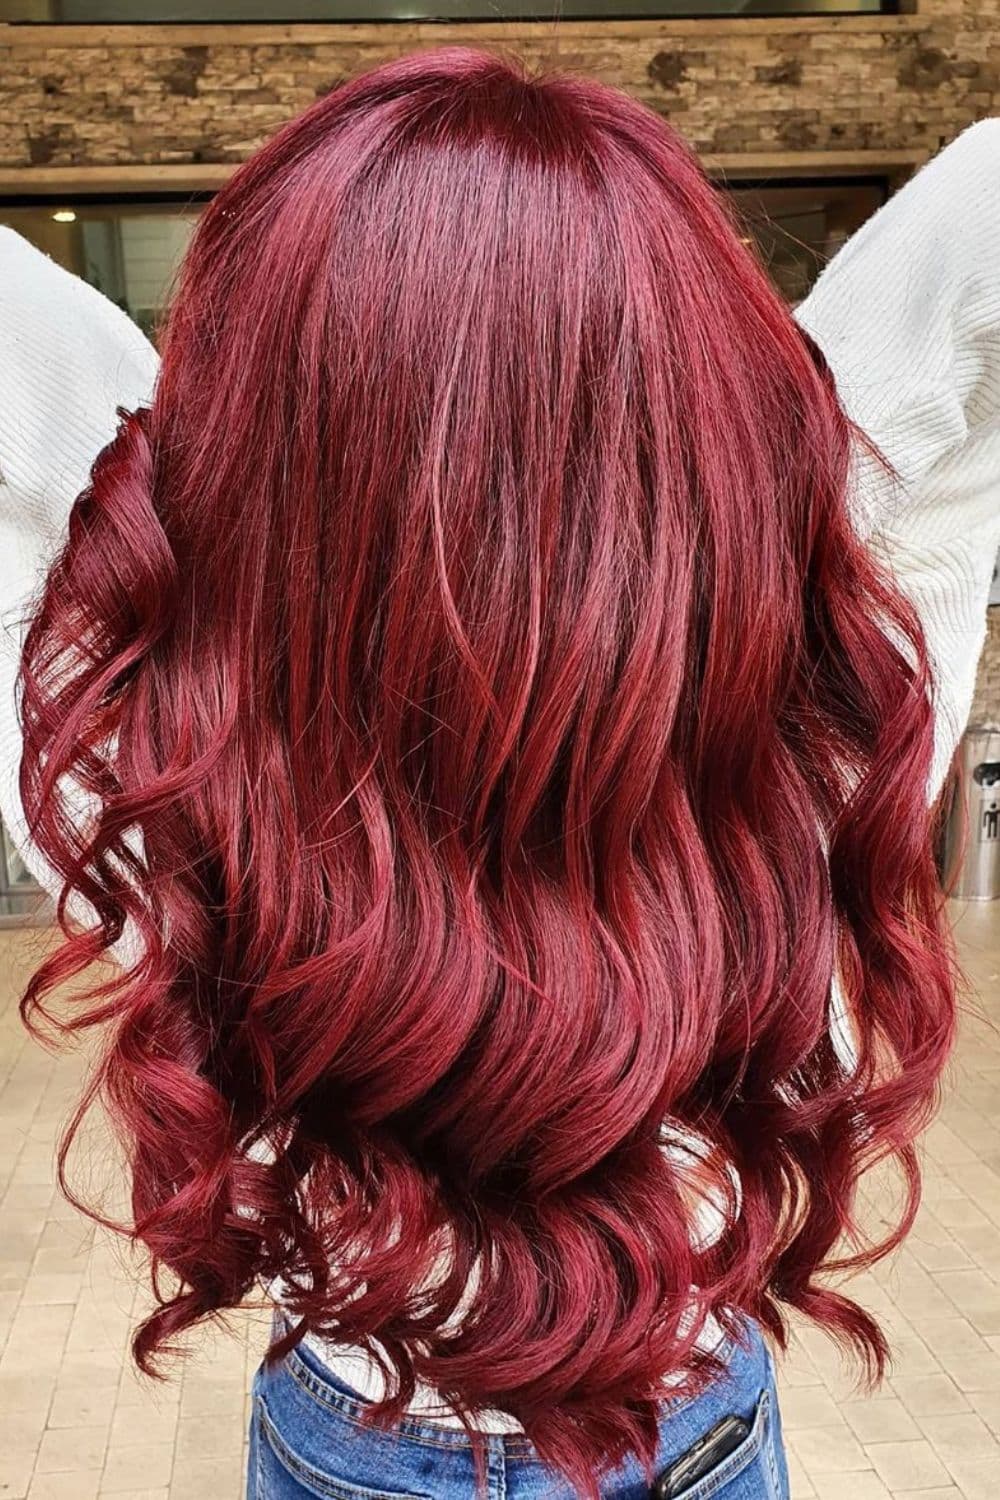 A woman with long wavy red apple hair.